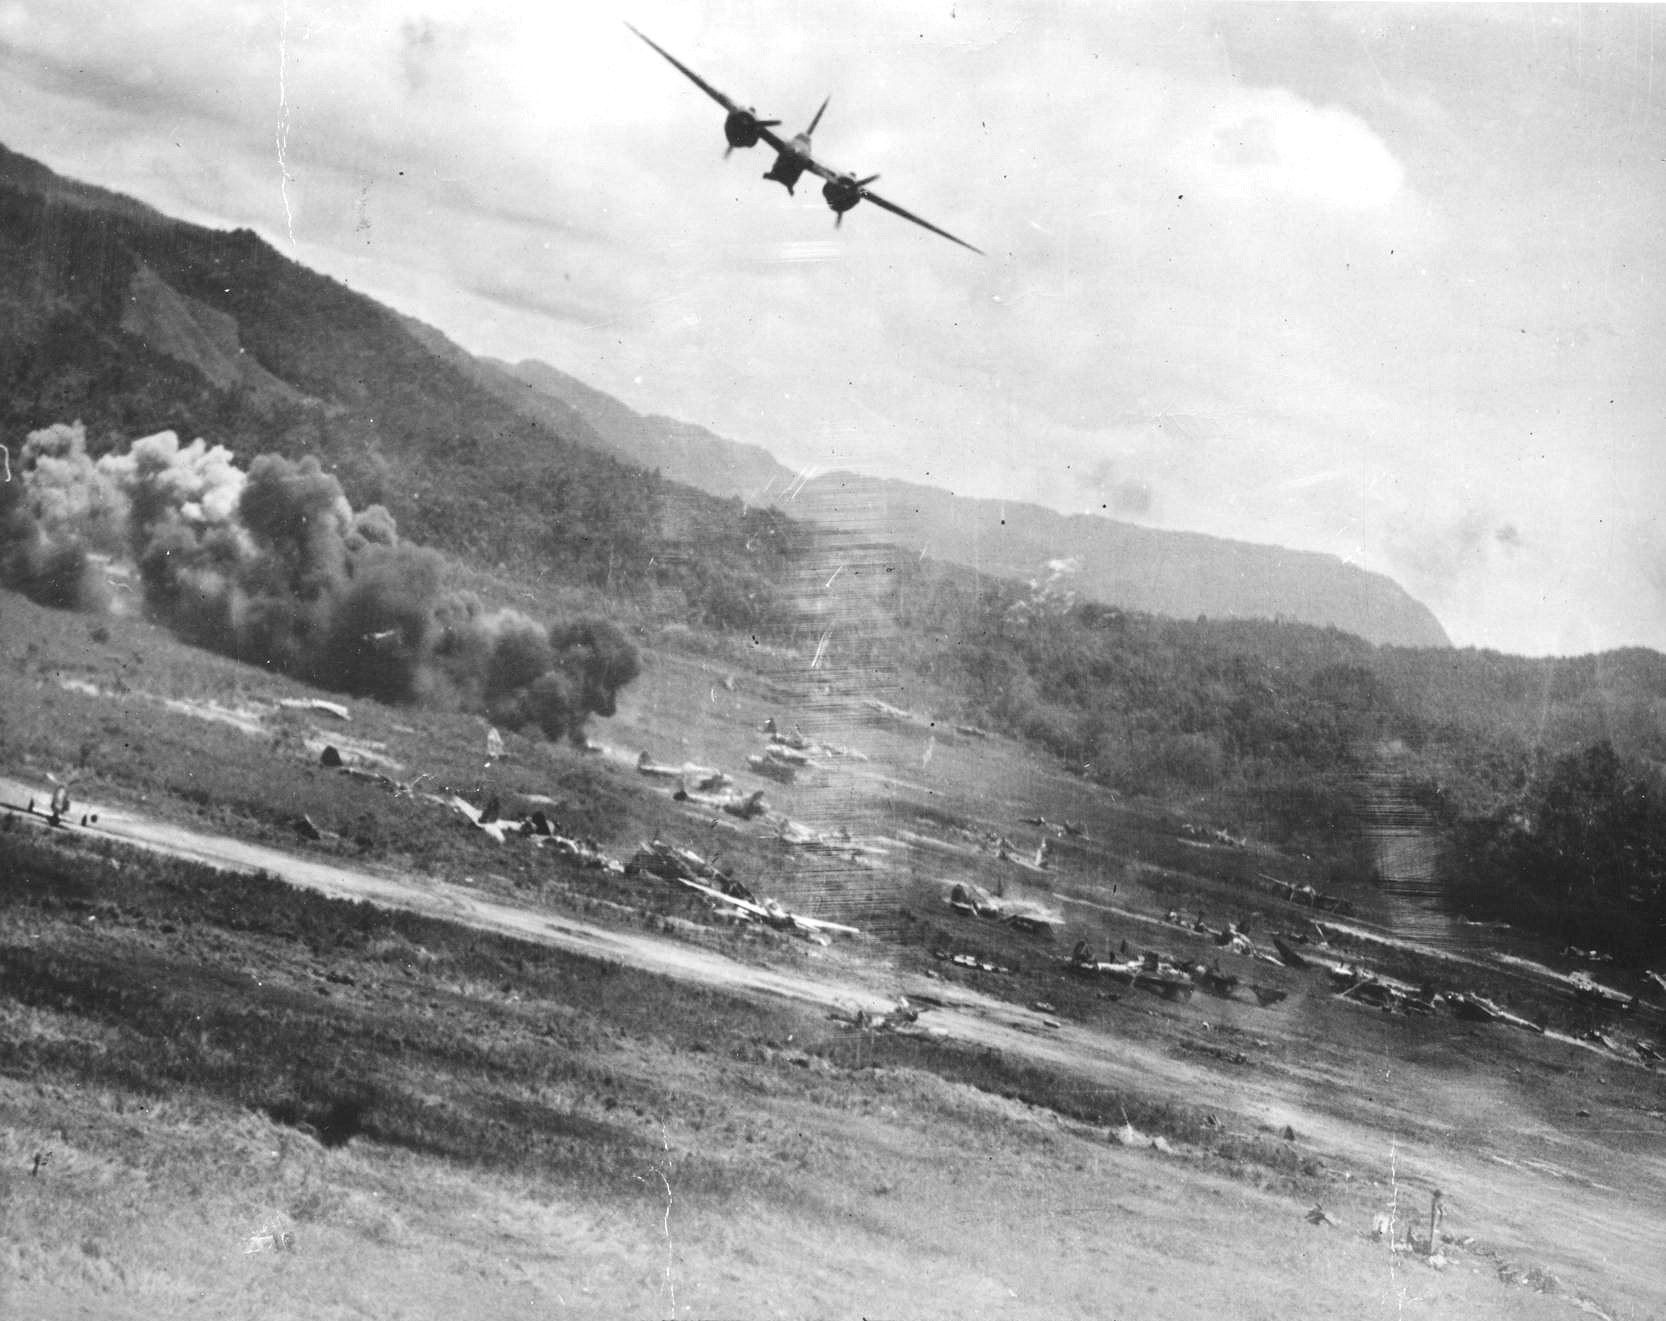 A-20 Havoc aircraft of US V Bombing Command targeting Japanese airfield of Ki-48 bombers, at Hollandia, New Guinea, 1942